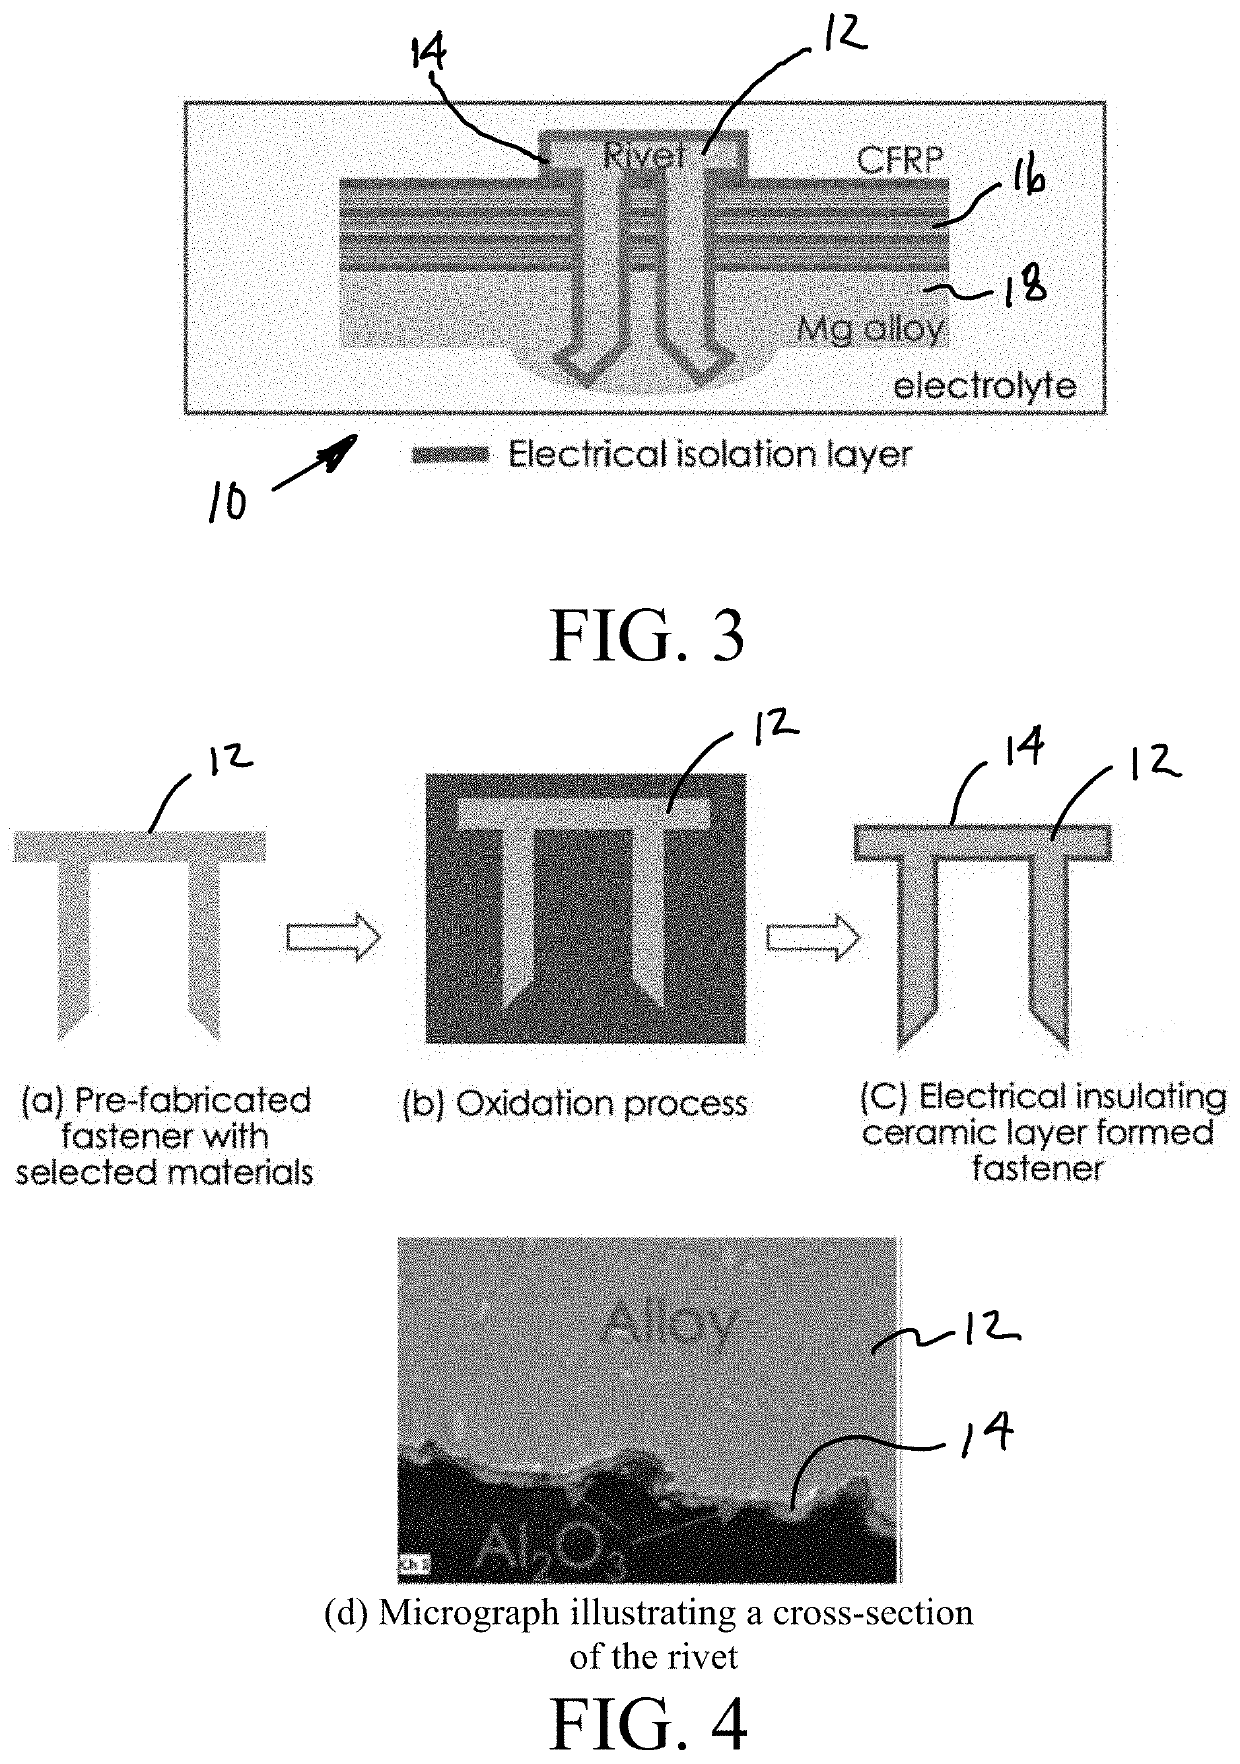 Fastener joint and associated method for avoiding corrosion of dissimilar material fastener joints